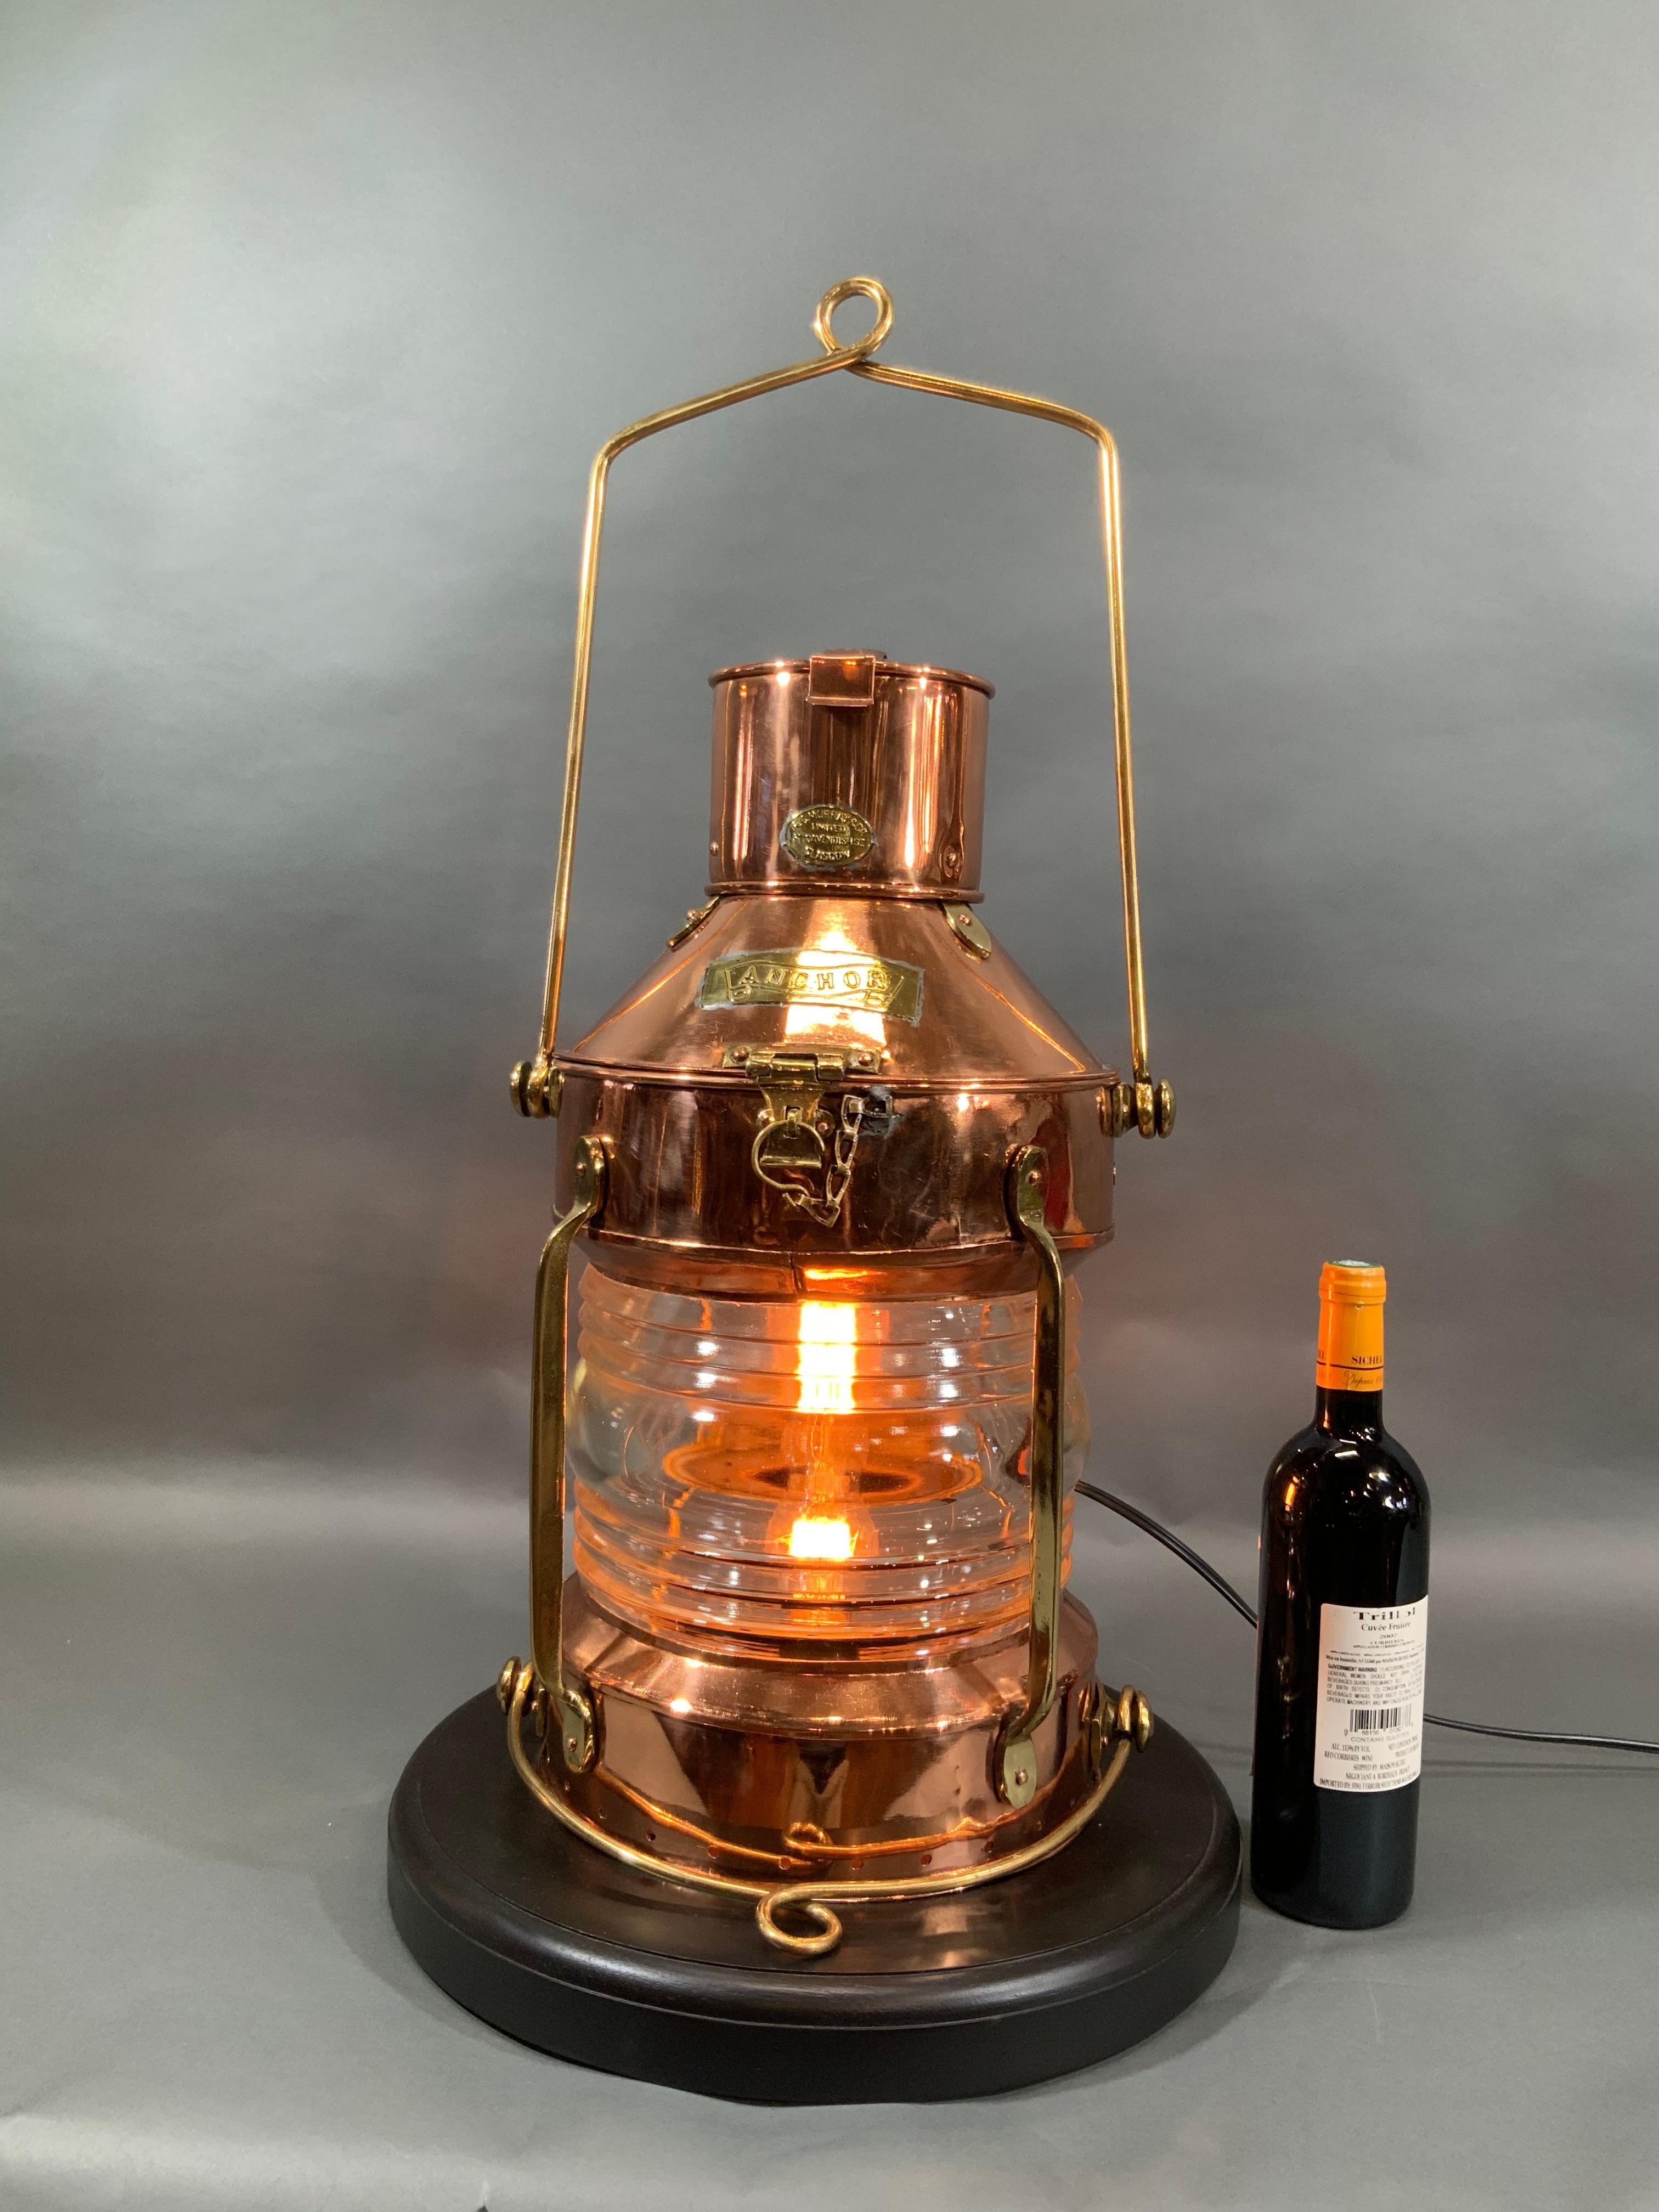 British Ship's Anchor Lantern of Copper and Brass with Fresnel Glass Lens by R.C. Murray